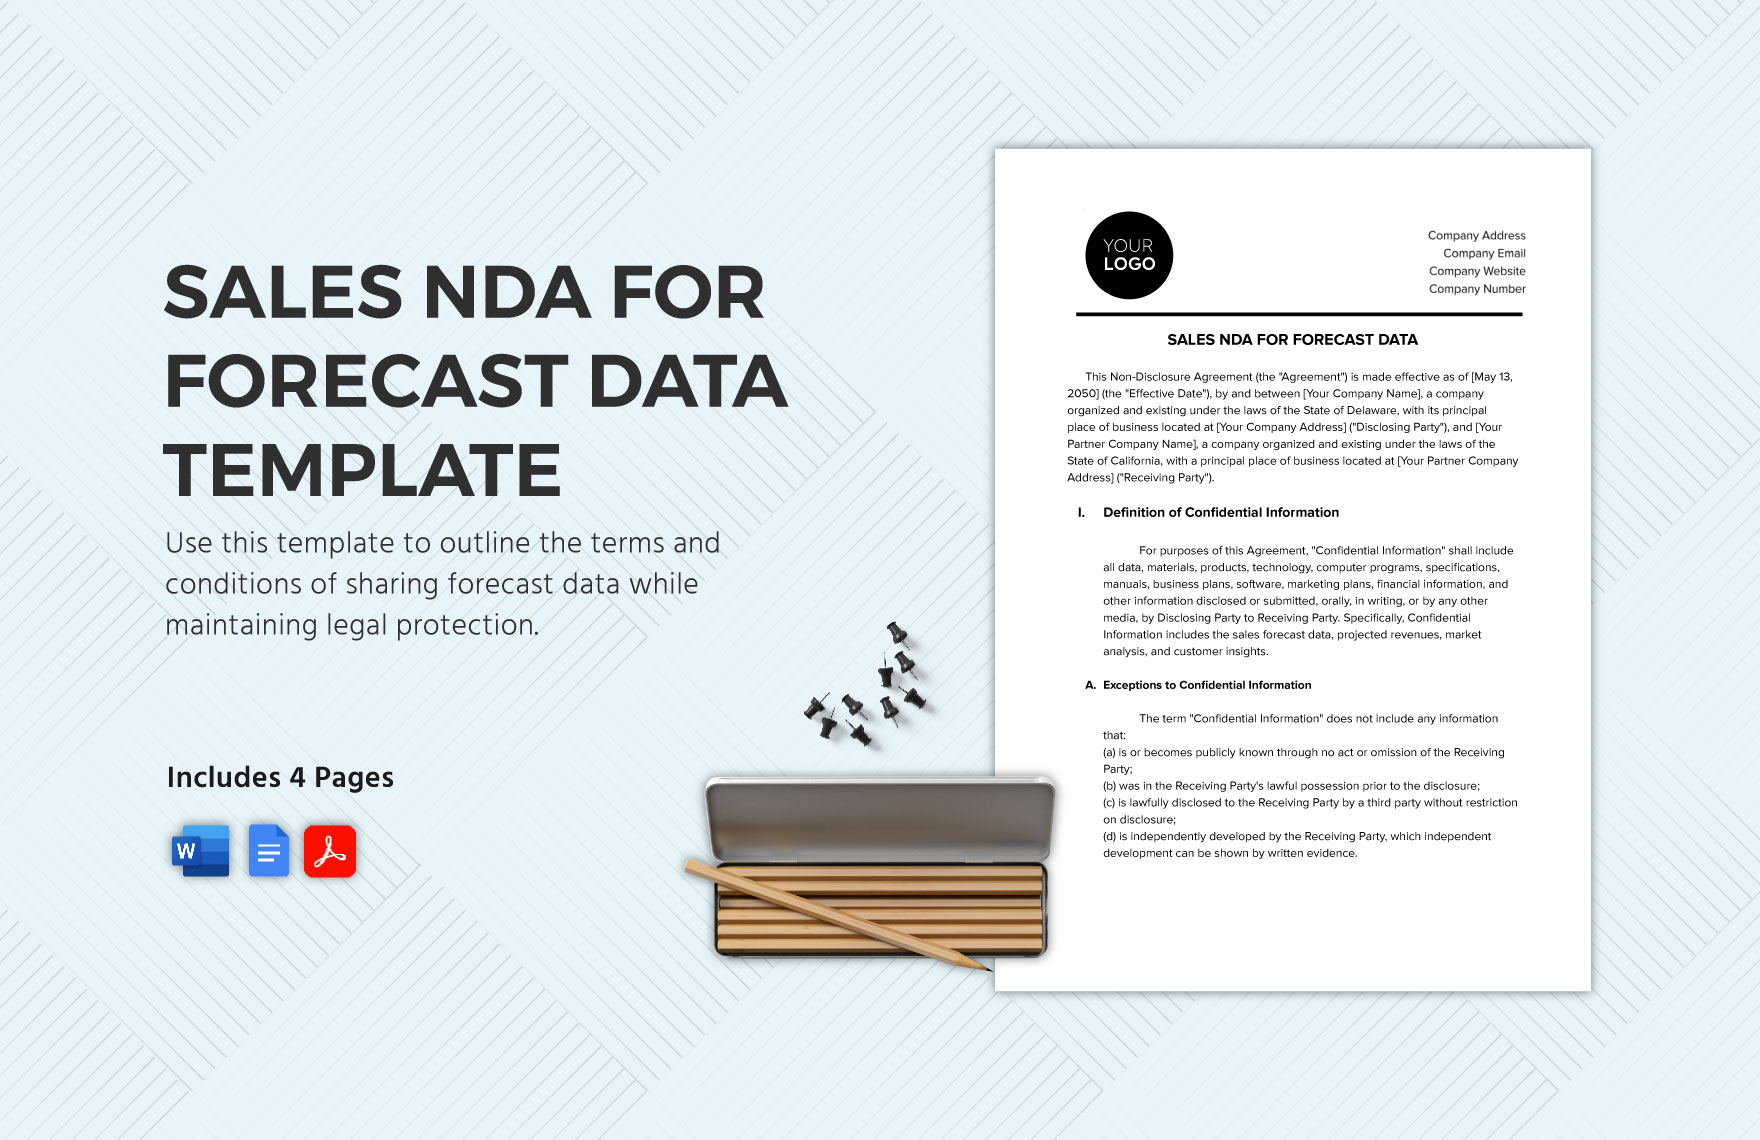 Sales NDA for Forecast Data Template